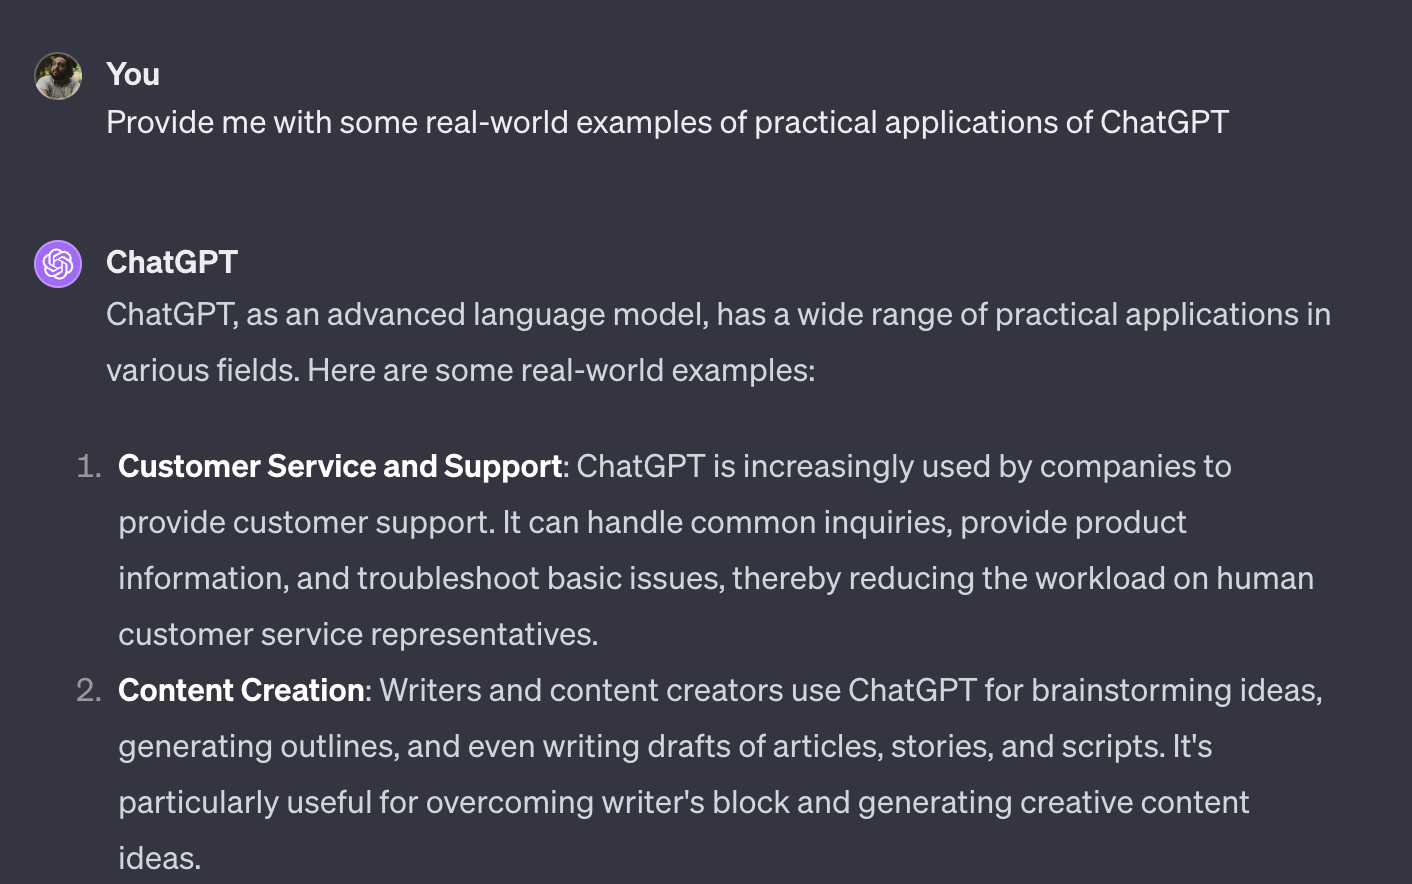 Asking ChatGPT for real-world examples of it’s applicabilities